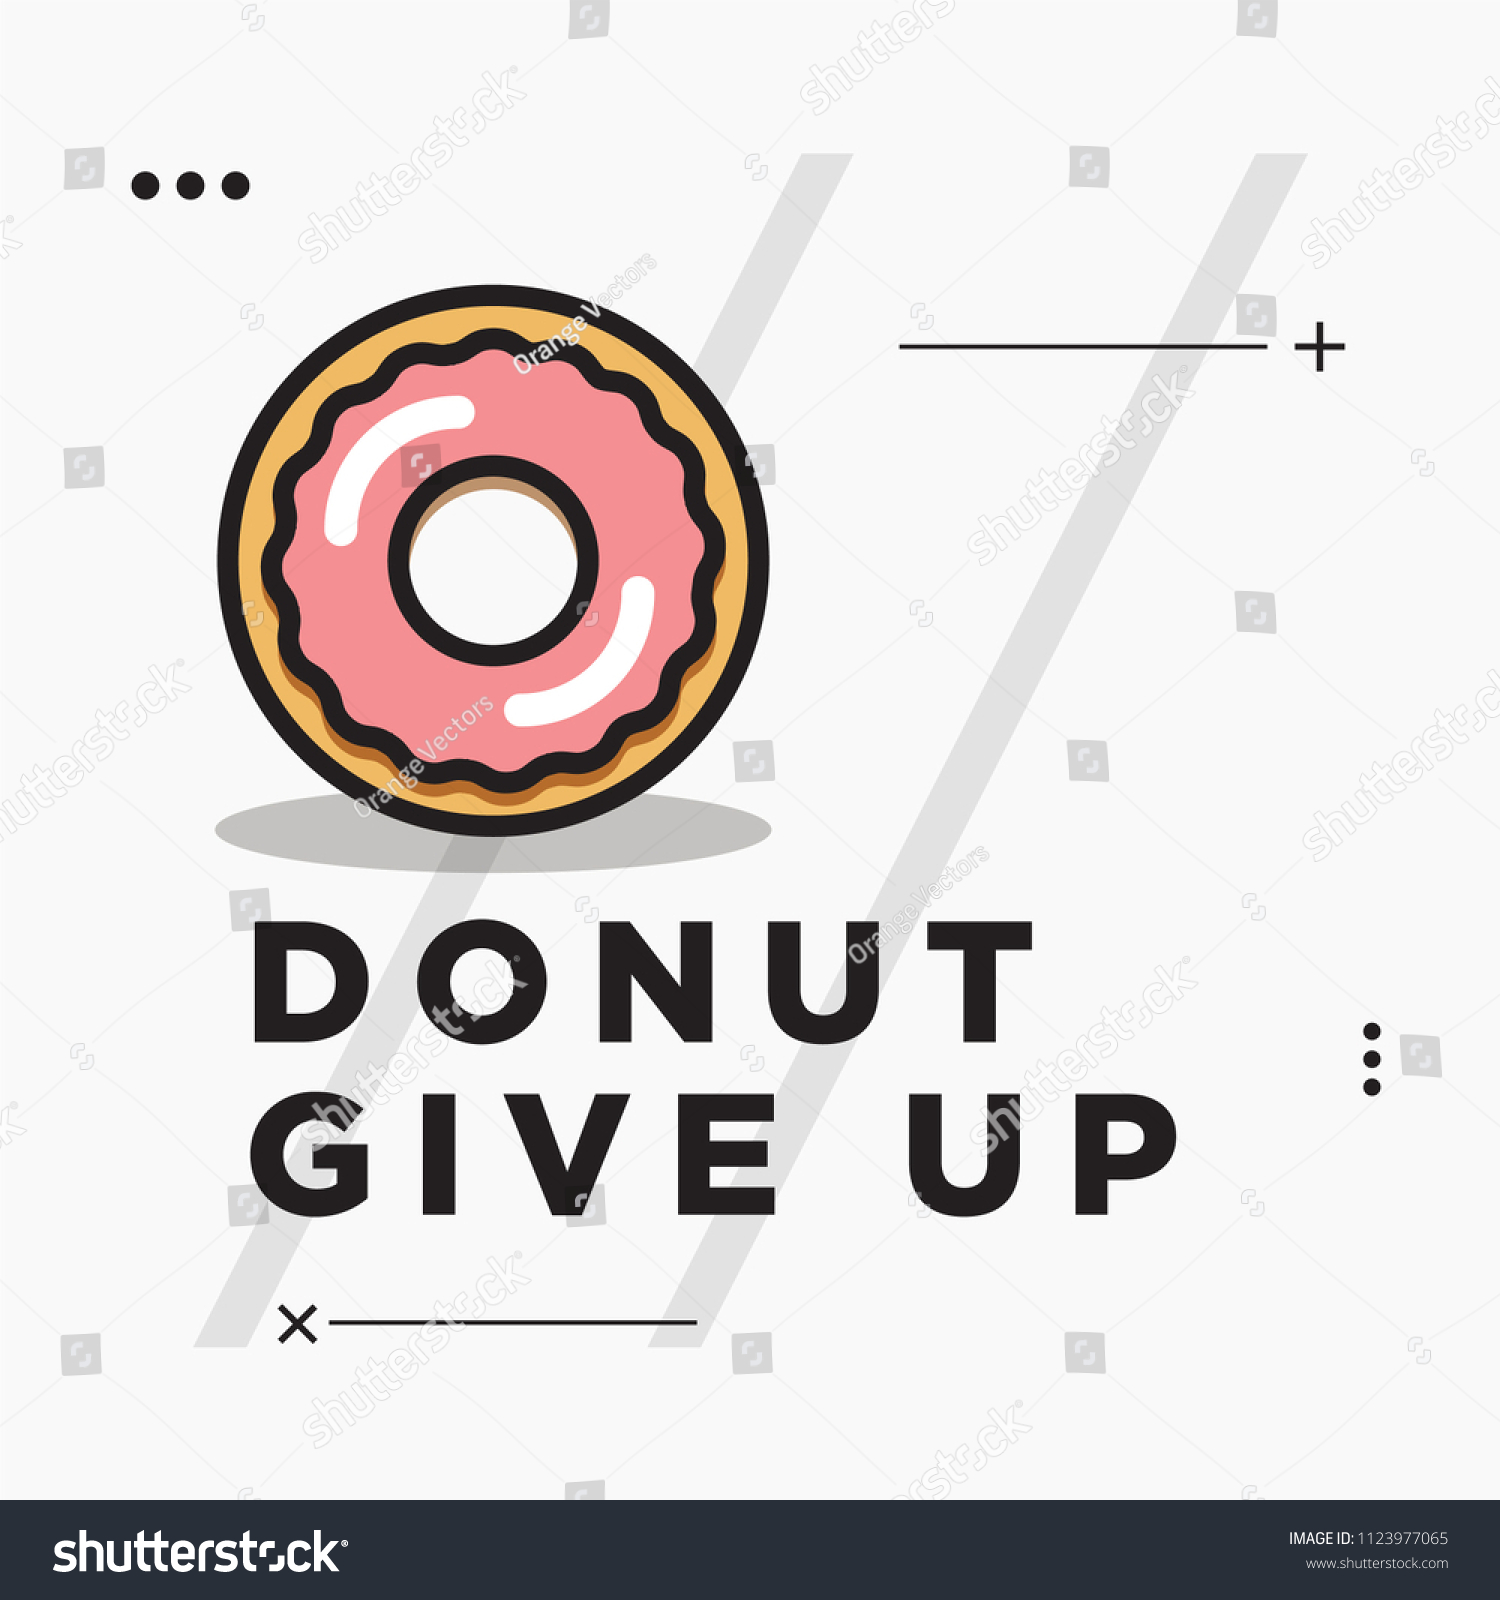 Donut Give Motivational Quote Poster Design Stock Vector Royalty Free 1123977065 Shutterstock 0031